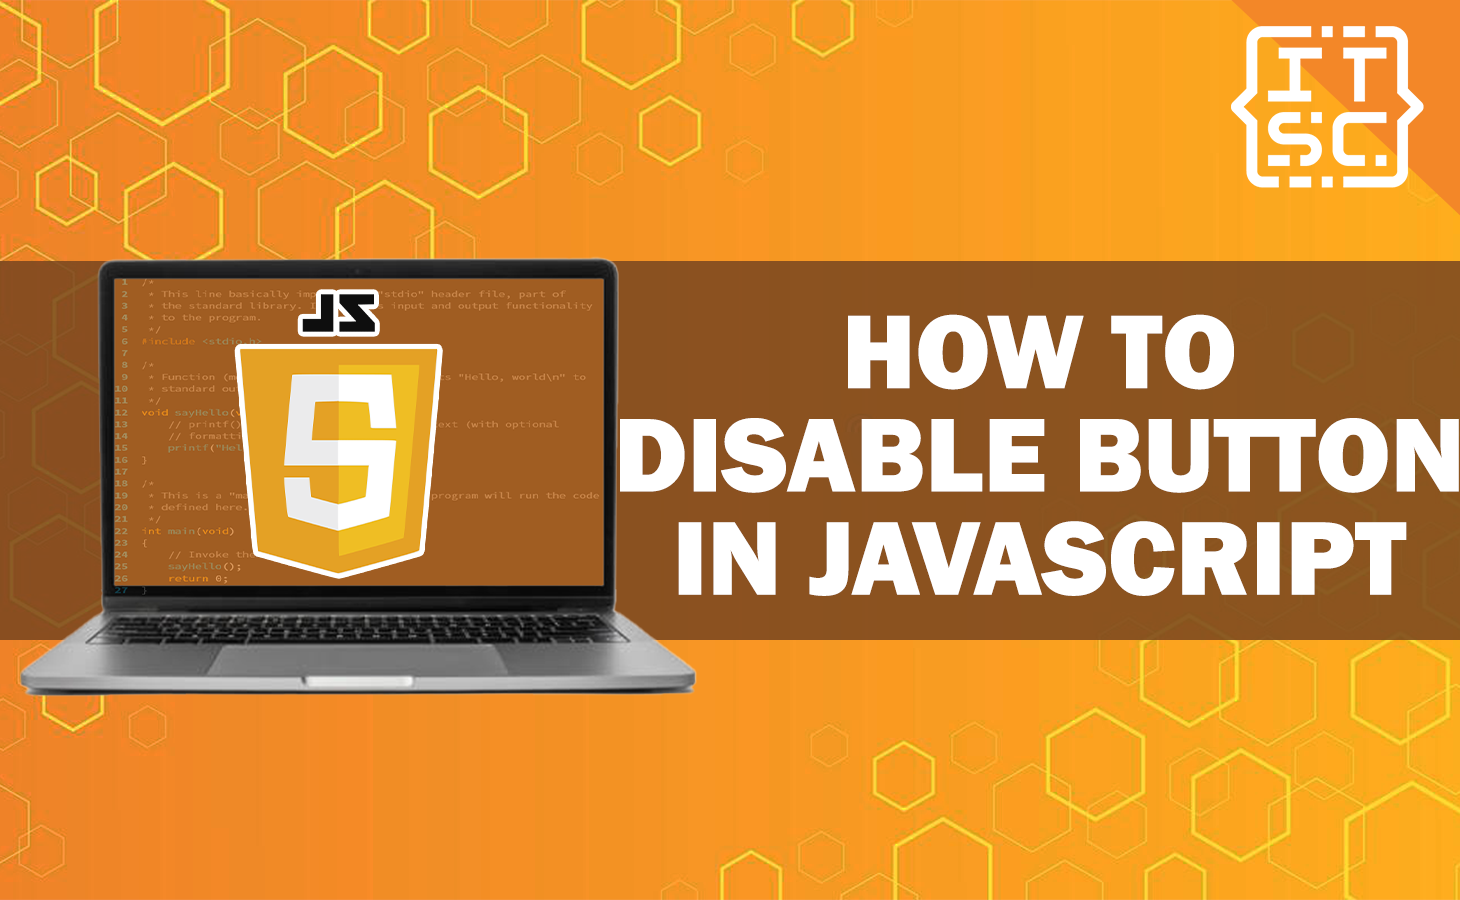 How to disable button in JavaScript